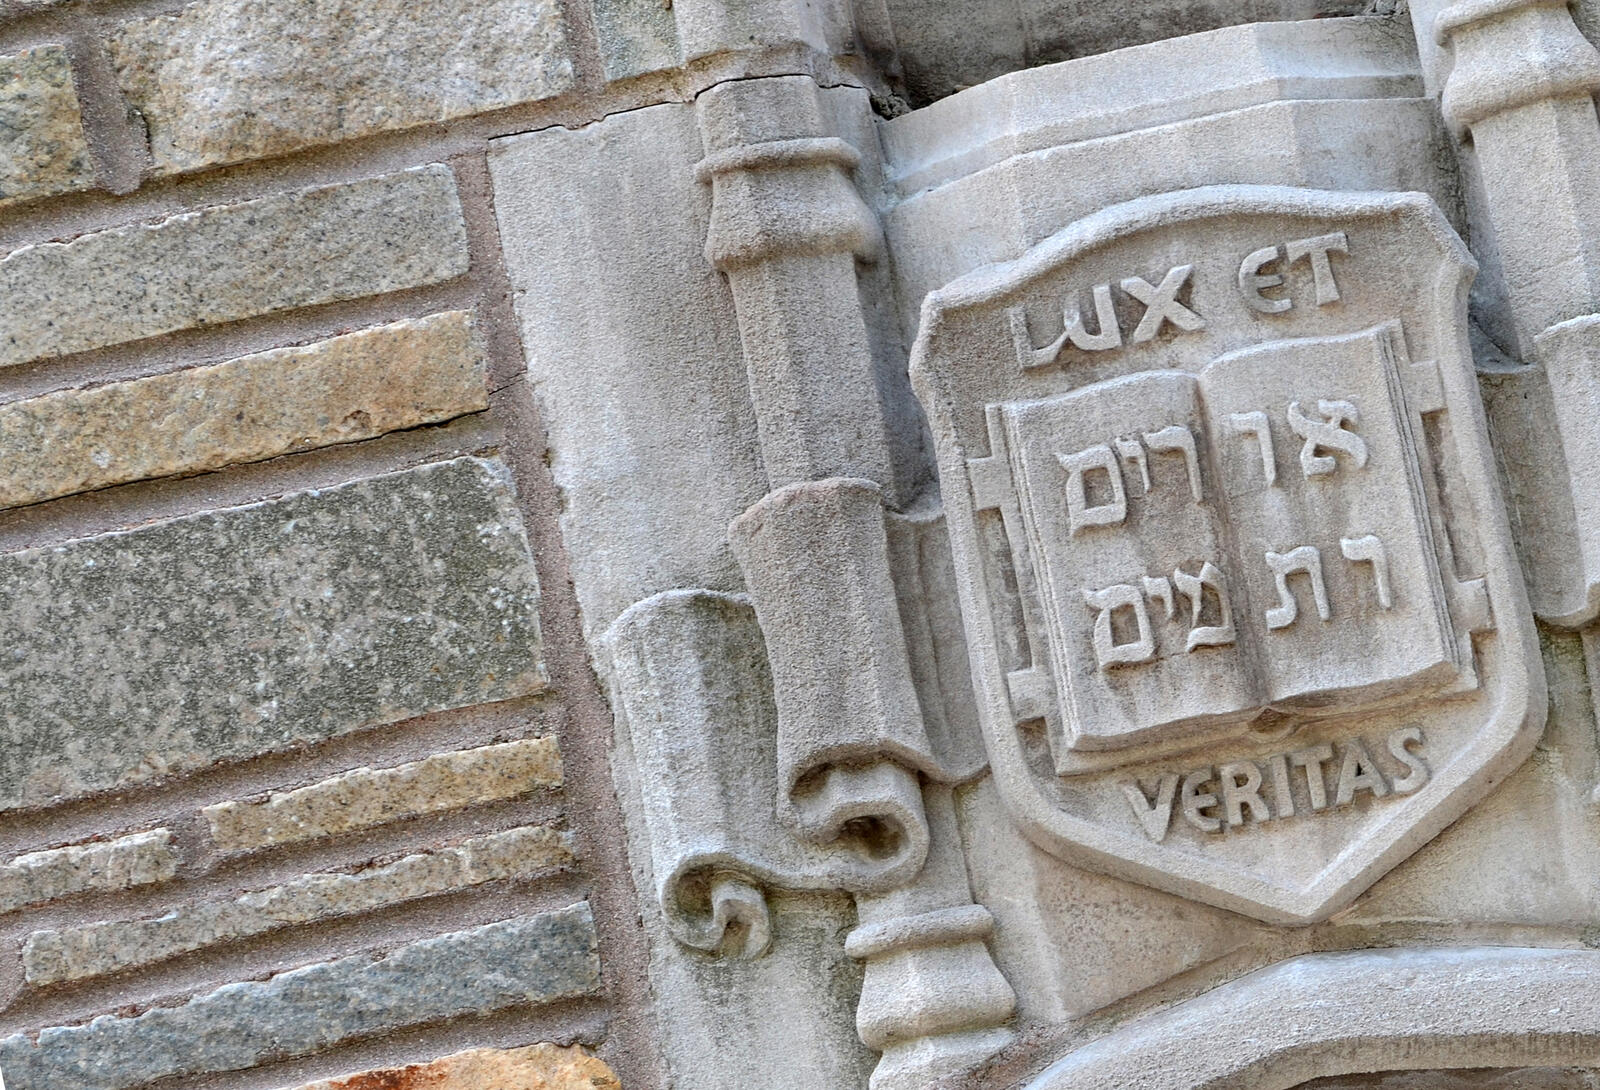 A carved stone shield is makes up a wall over an arched window. The shield is emblazoned with the text "lux et veritas," Yale's motto.